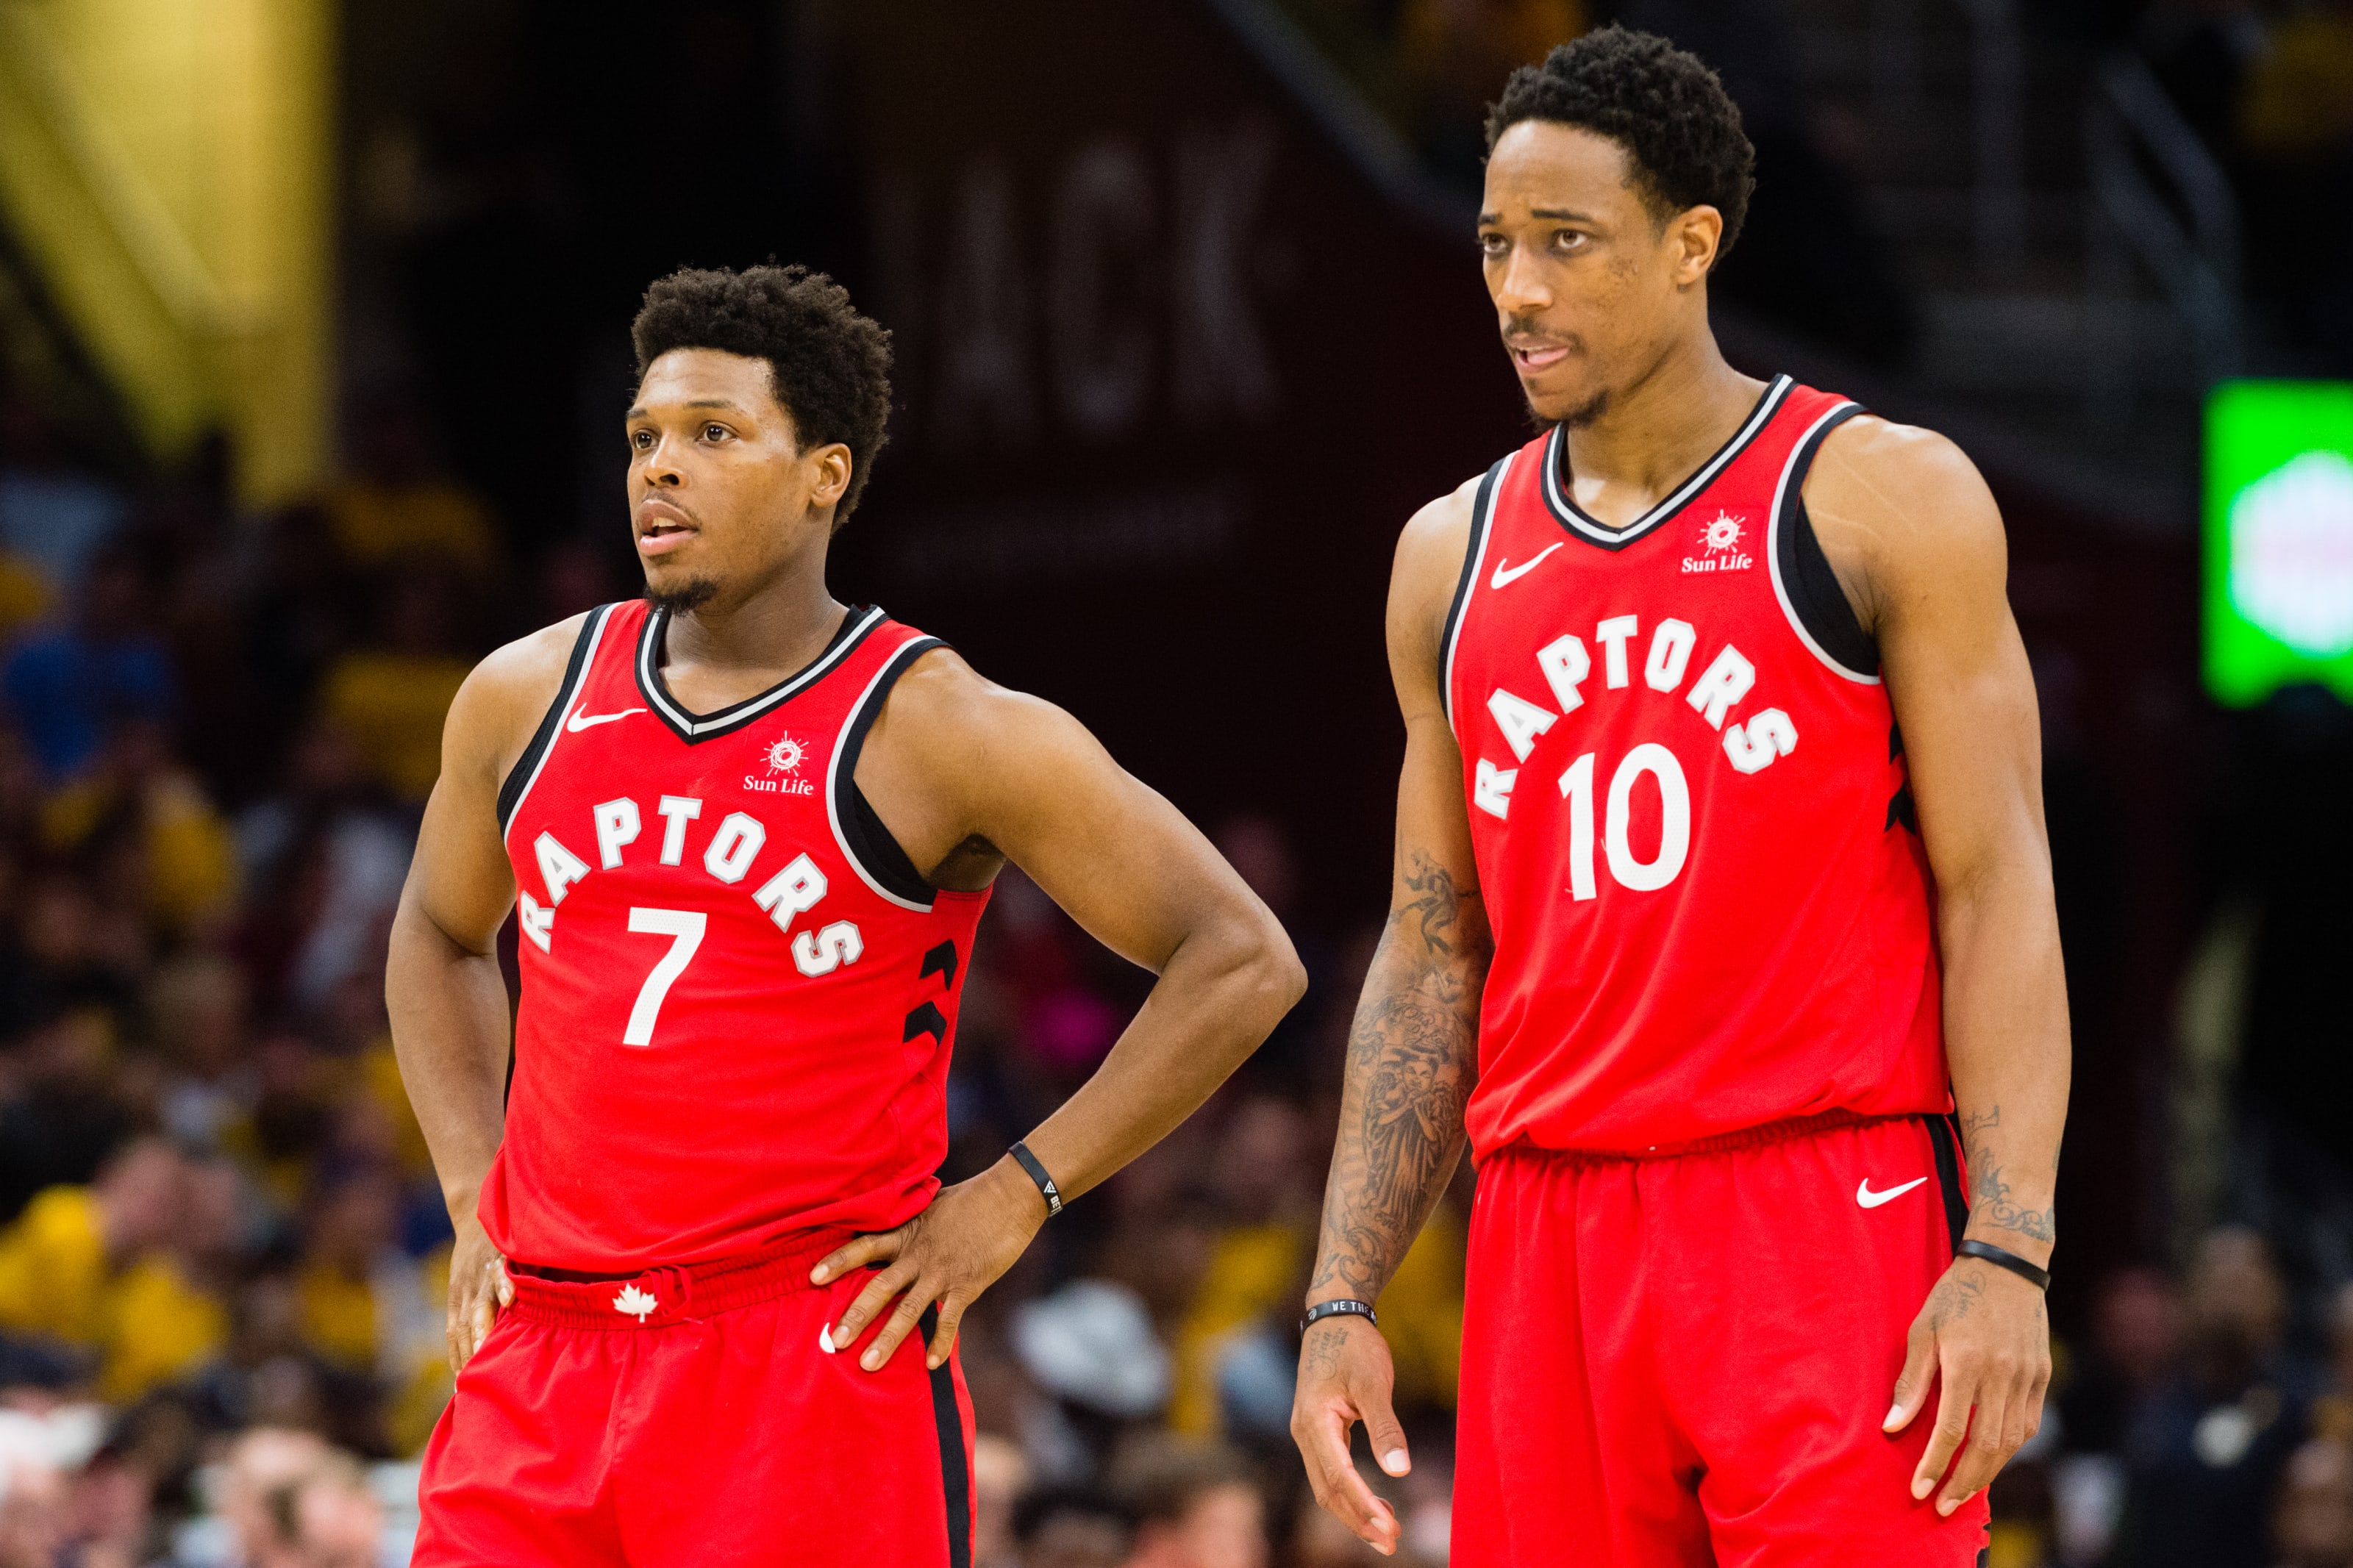 Toronto Raptors: Could a reunion with DeMar DeRozan be a possibility?